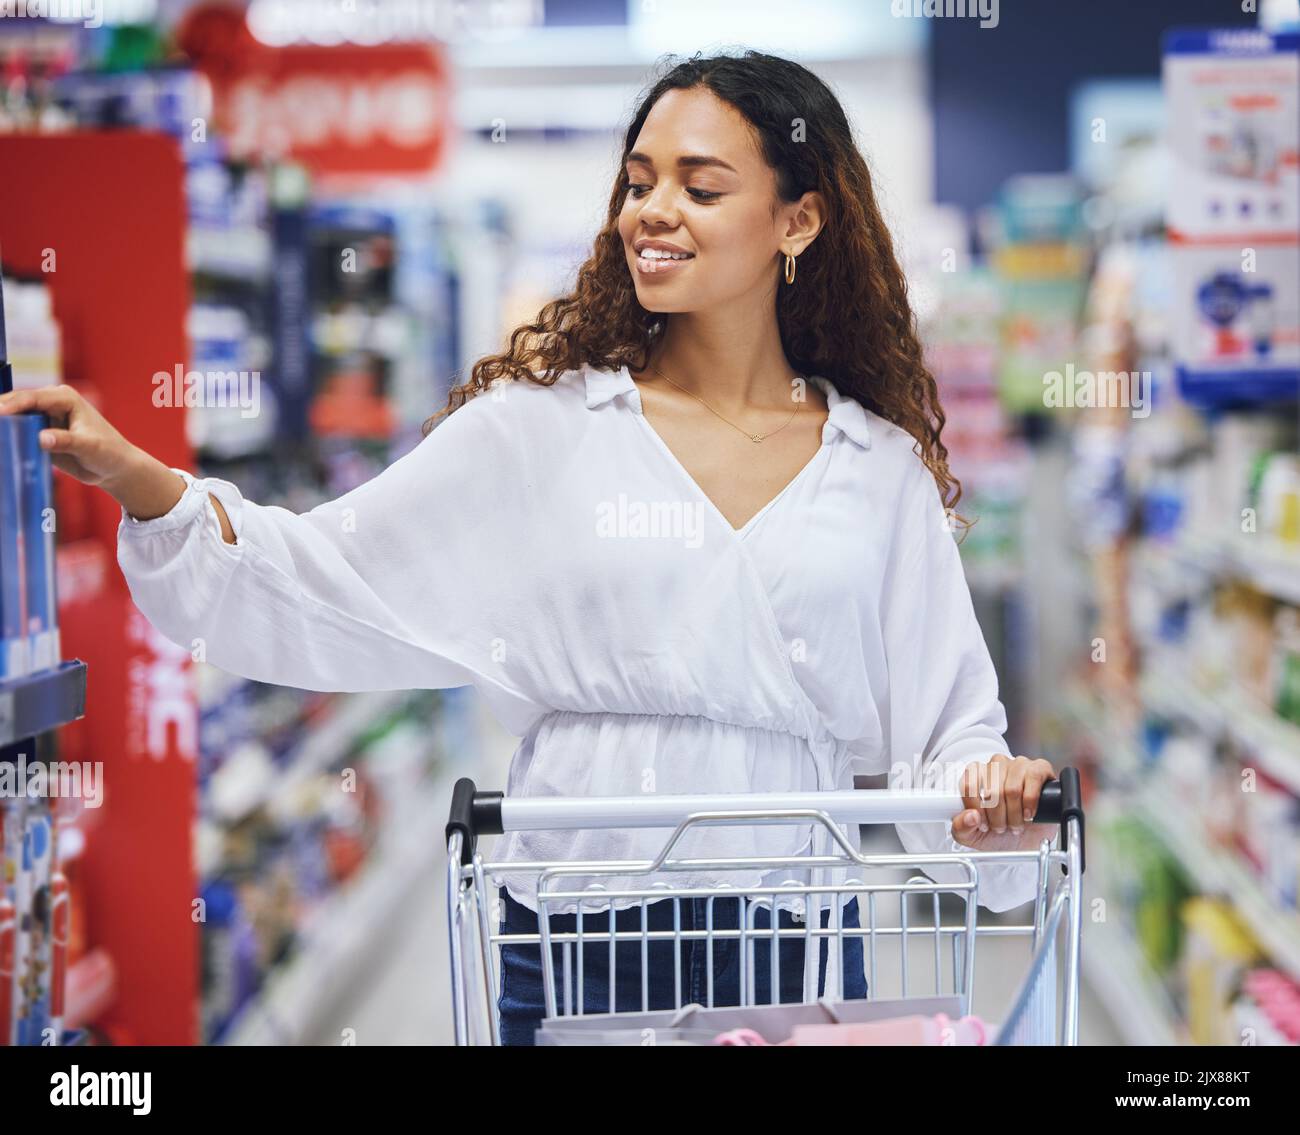 Customer, shopper and consumer shopping for groceries in a supermarket store, mall shop or retail outlet. Happy woman pushing trolley in aisle to buy Stock Photo